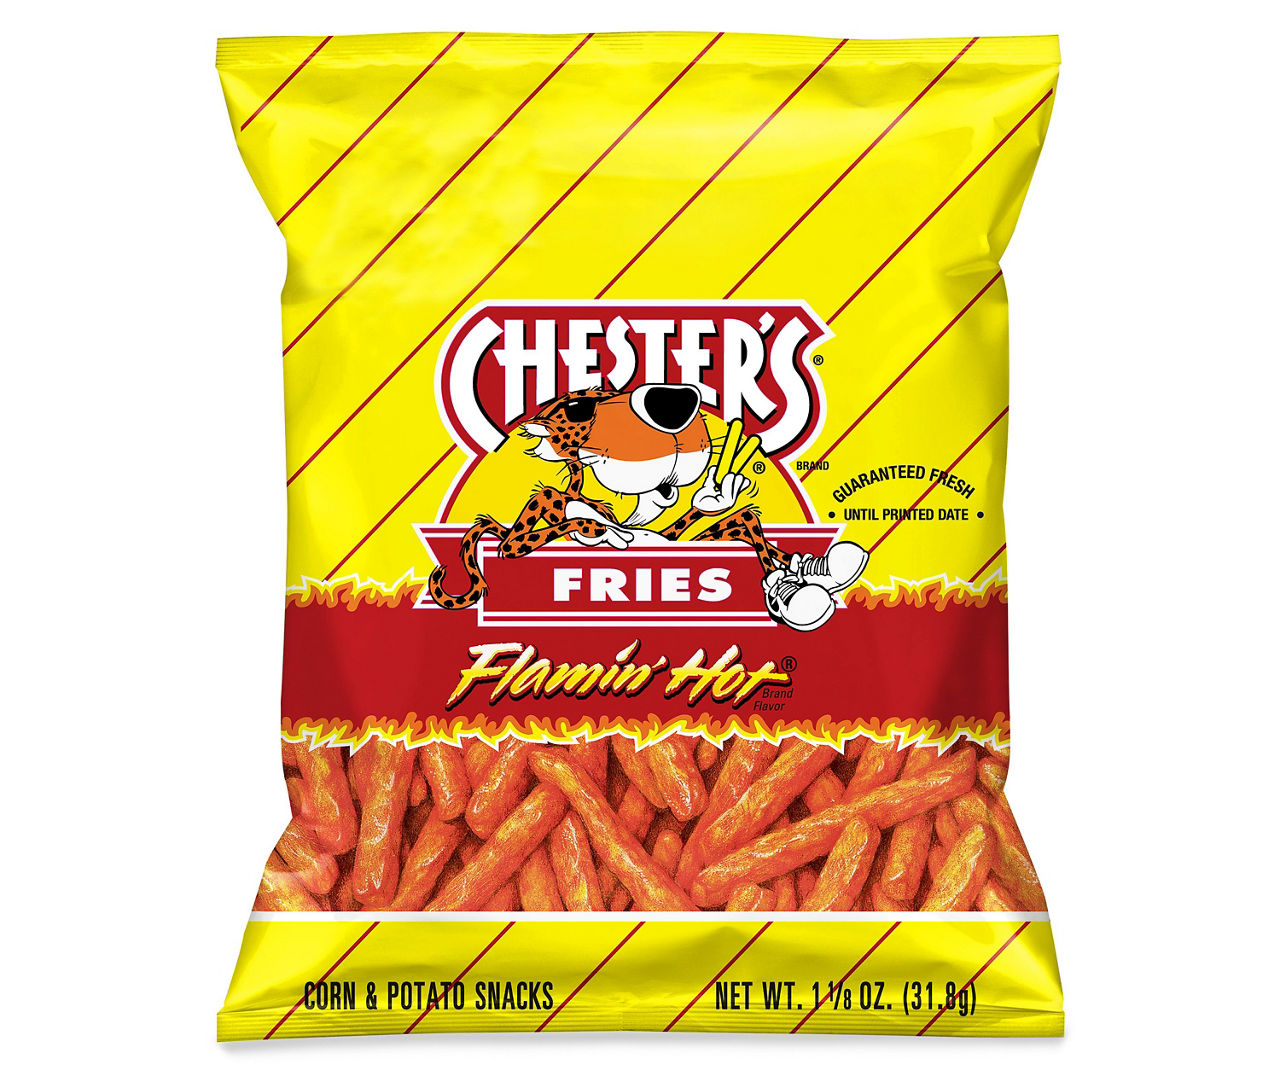  Chesters Flamin' Hot Fries, 1.75 oz bags (Pack of 8)